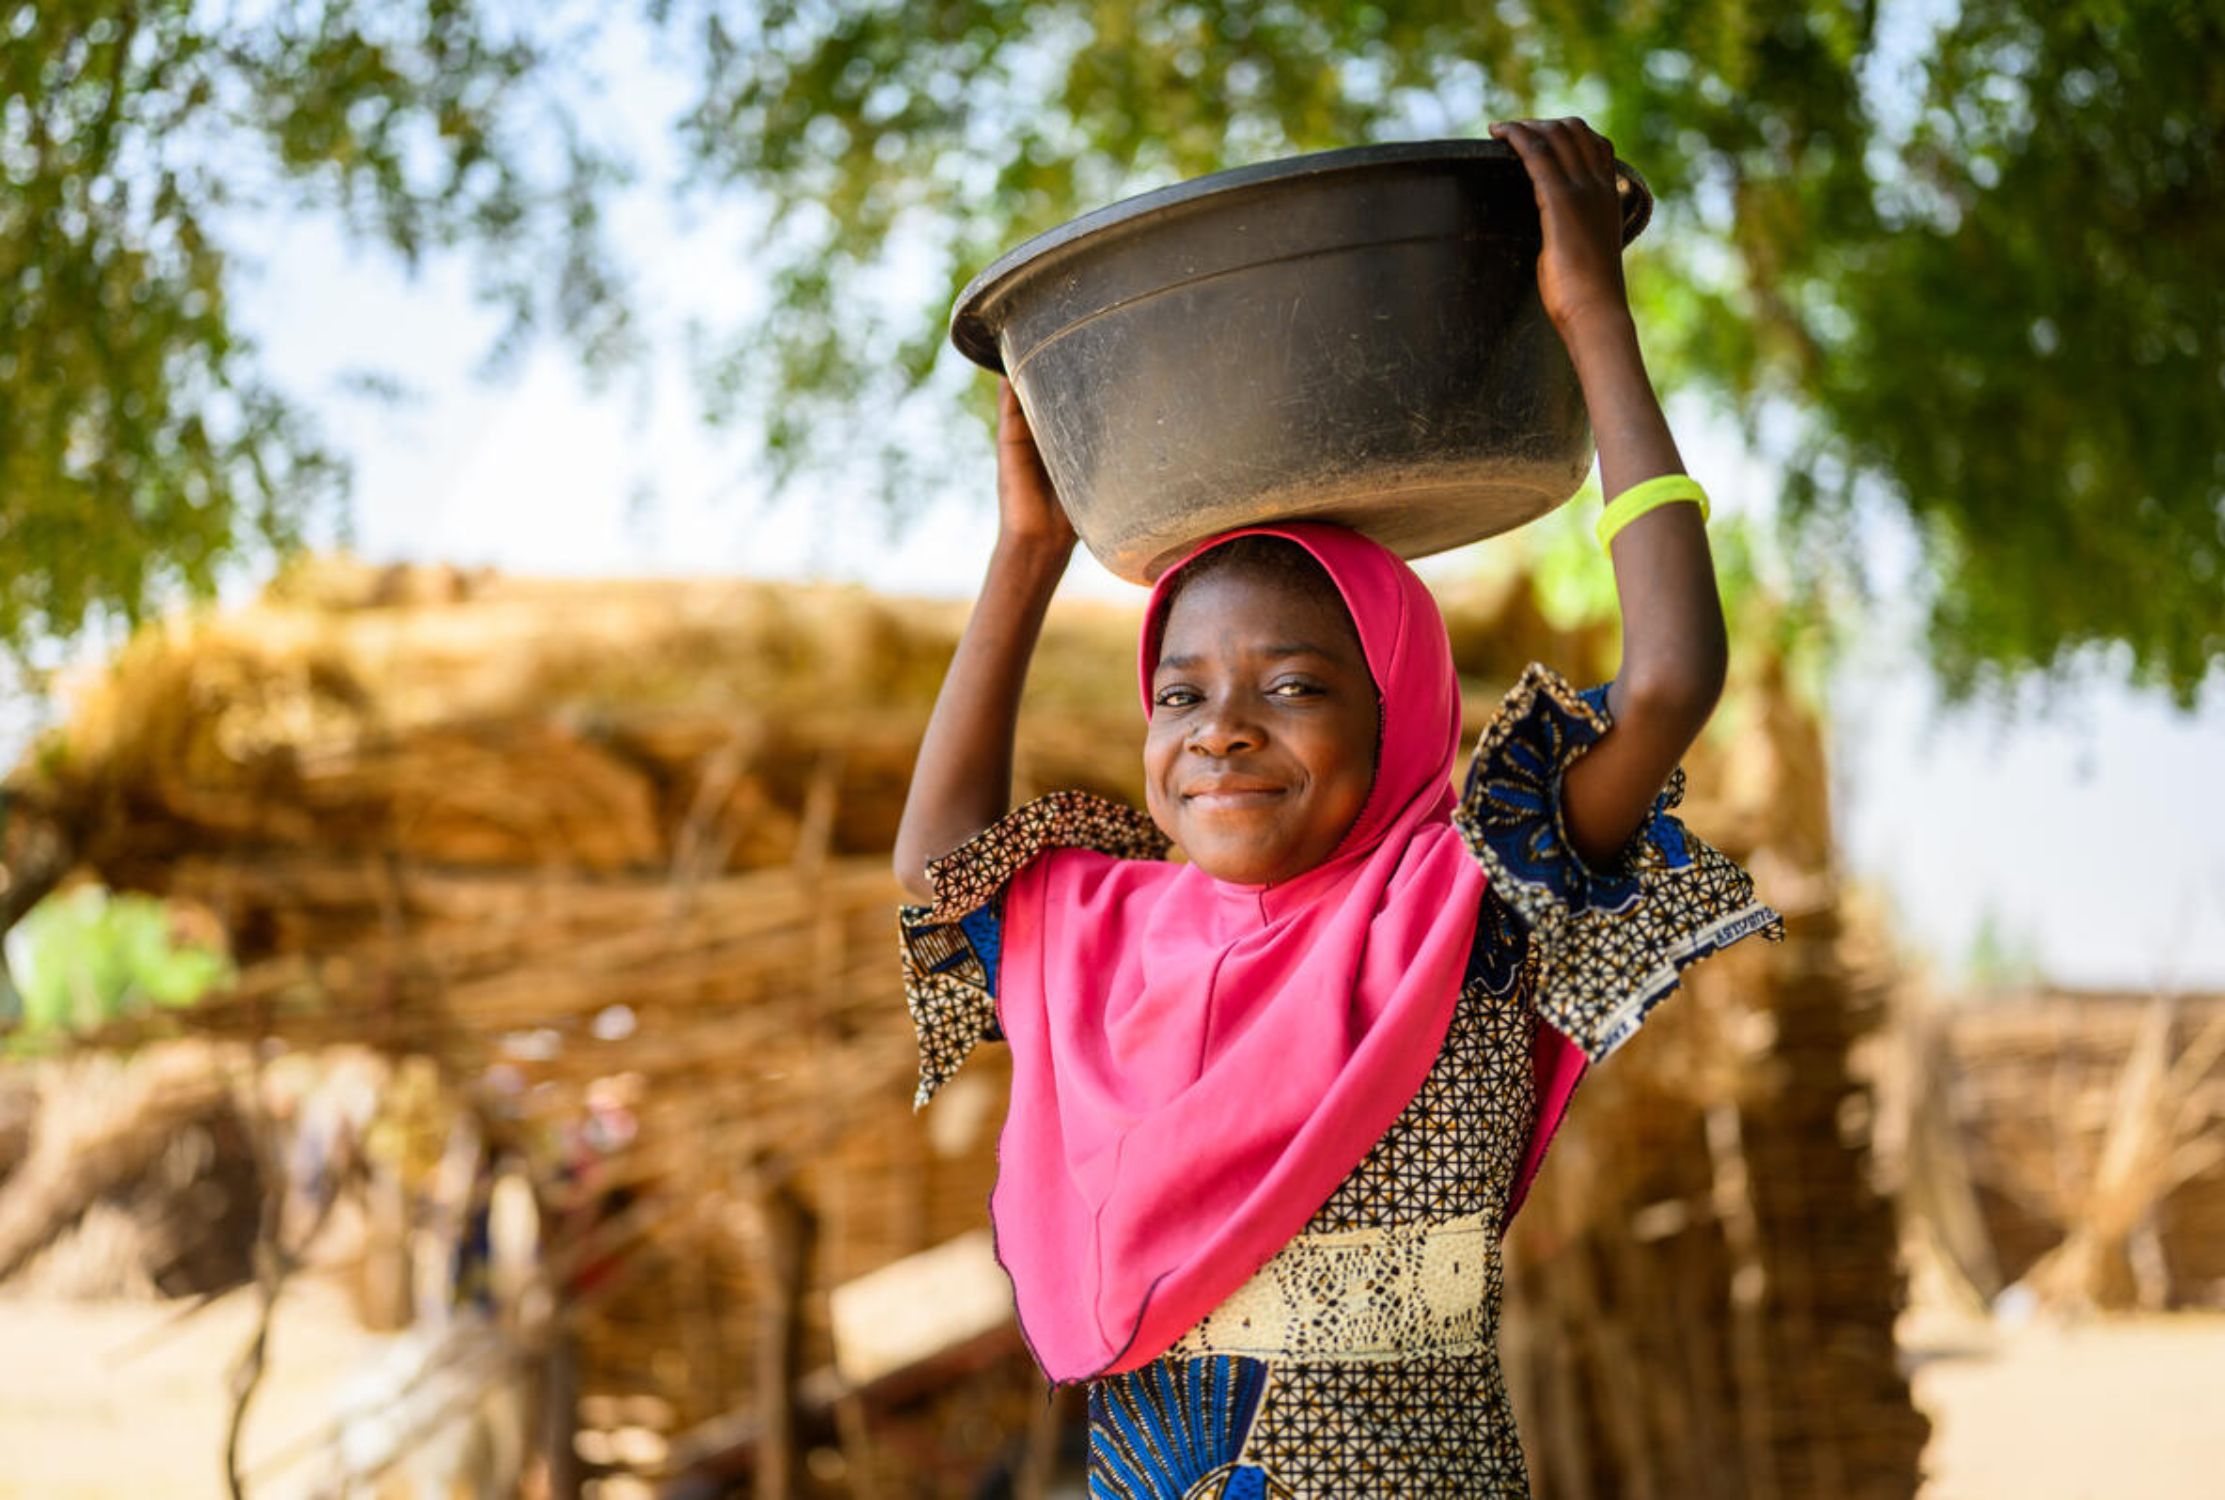 Nigerien nine-year-old girl carrying a water basin on her head